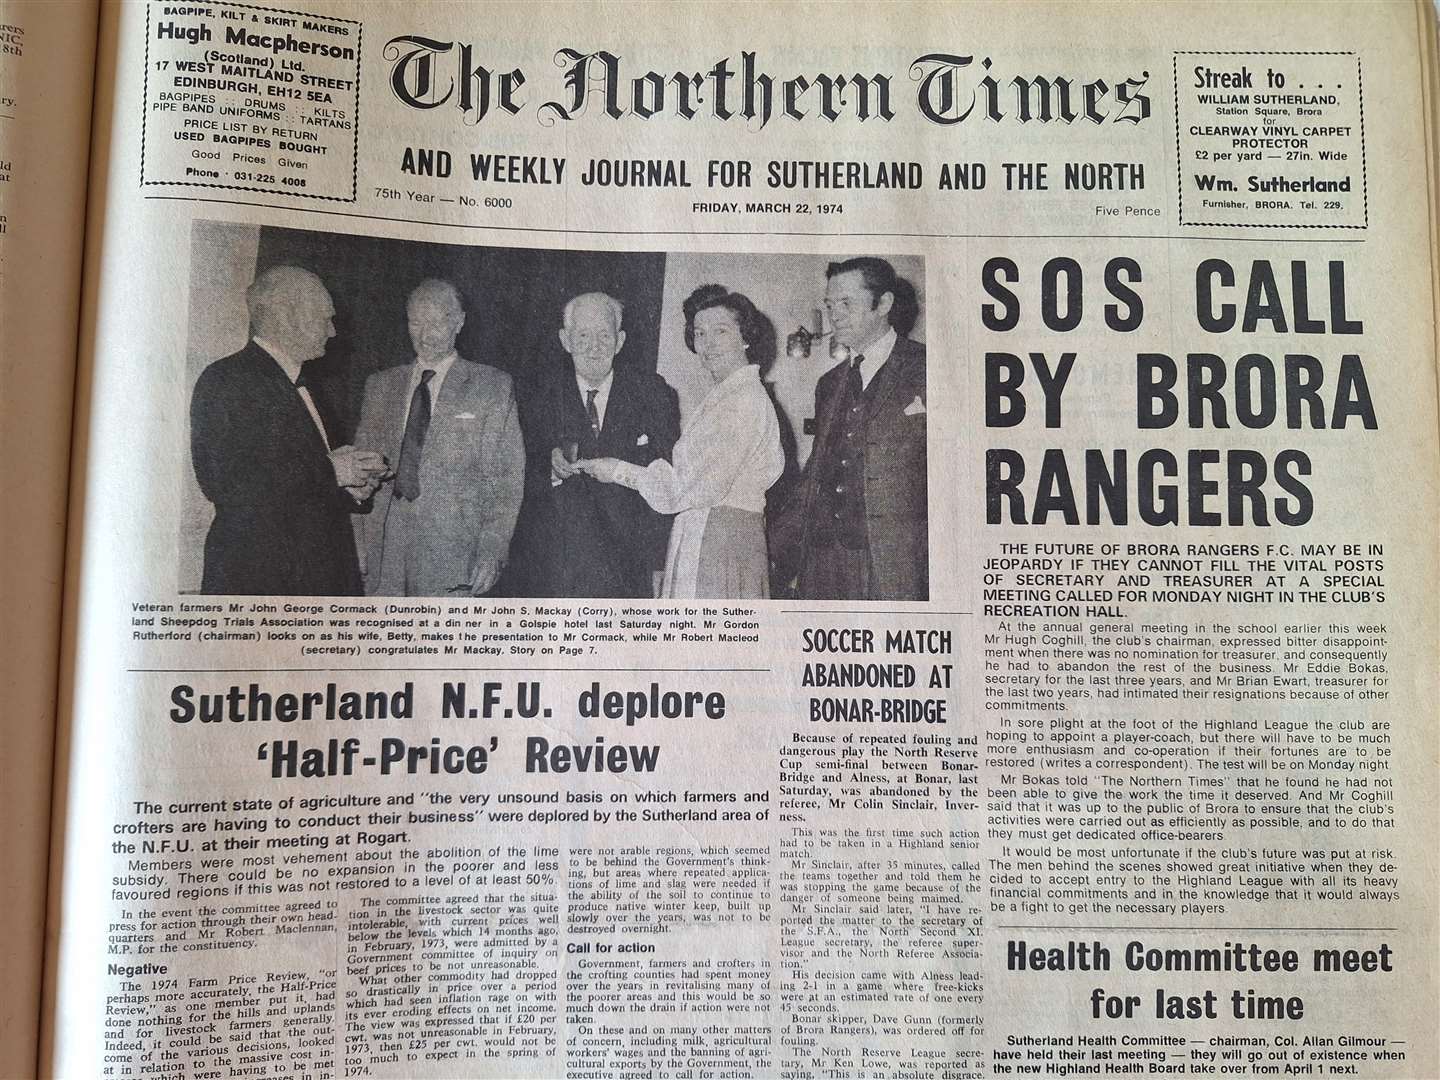 The edition of March 22, 1974.